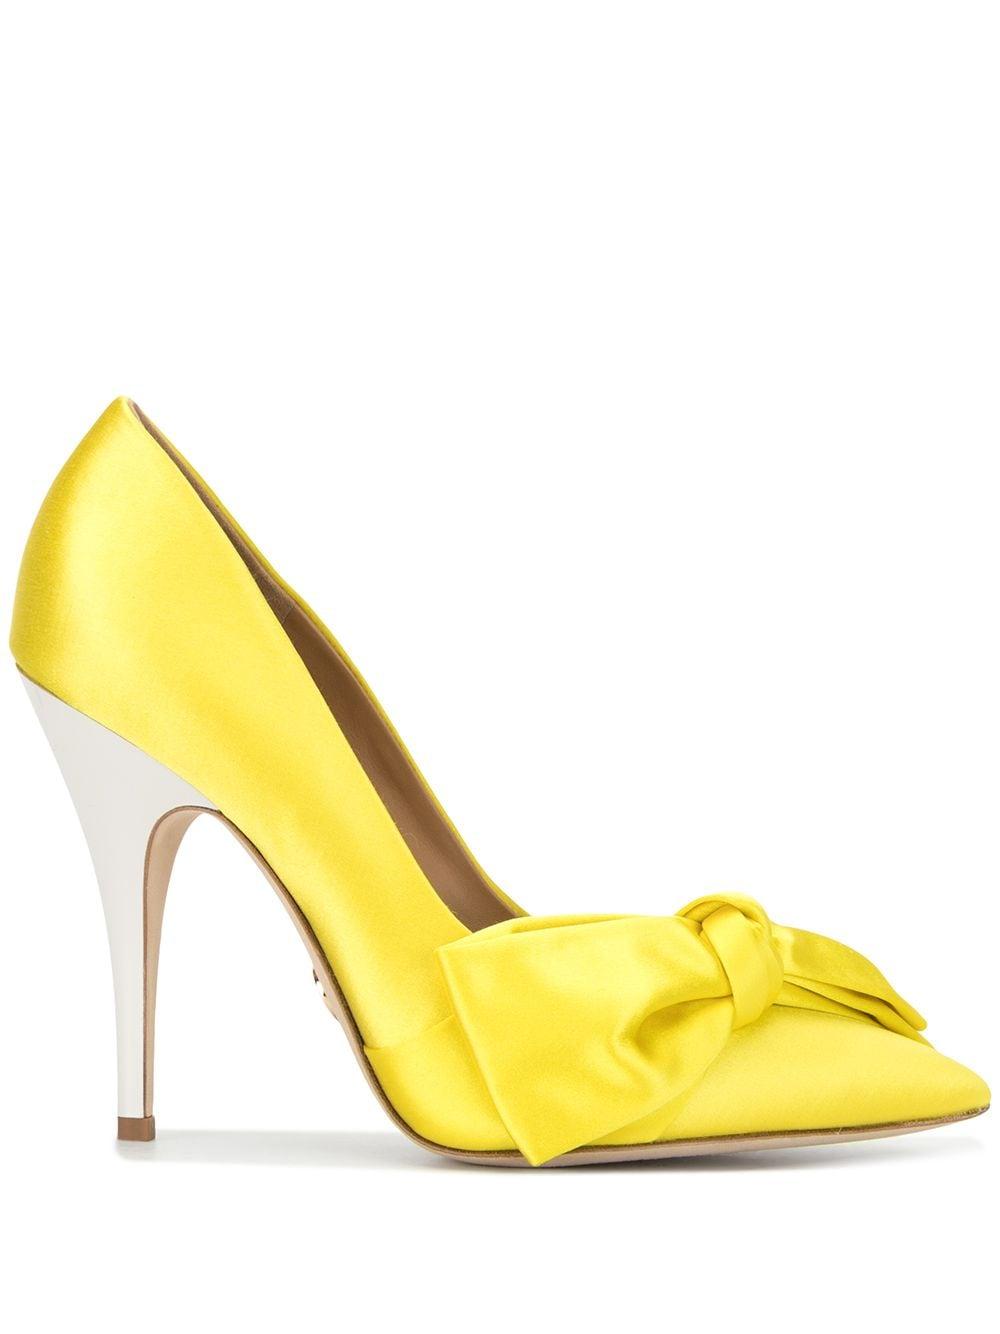 Tory Burch Bow Satin 110mm Pumps in Yellow - Lyst